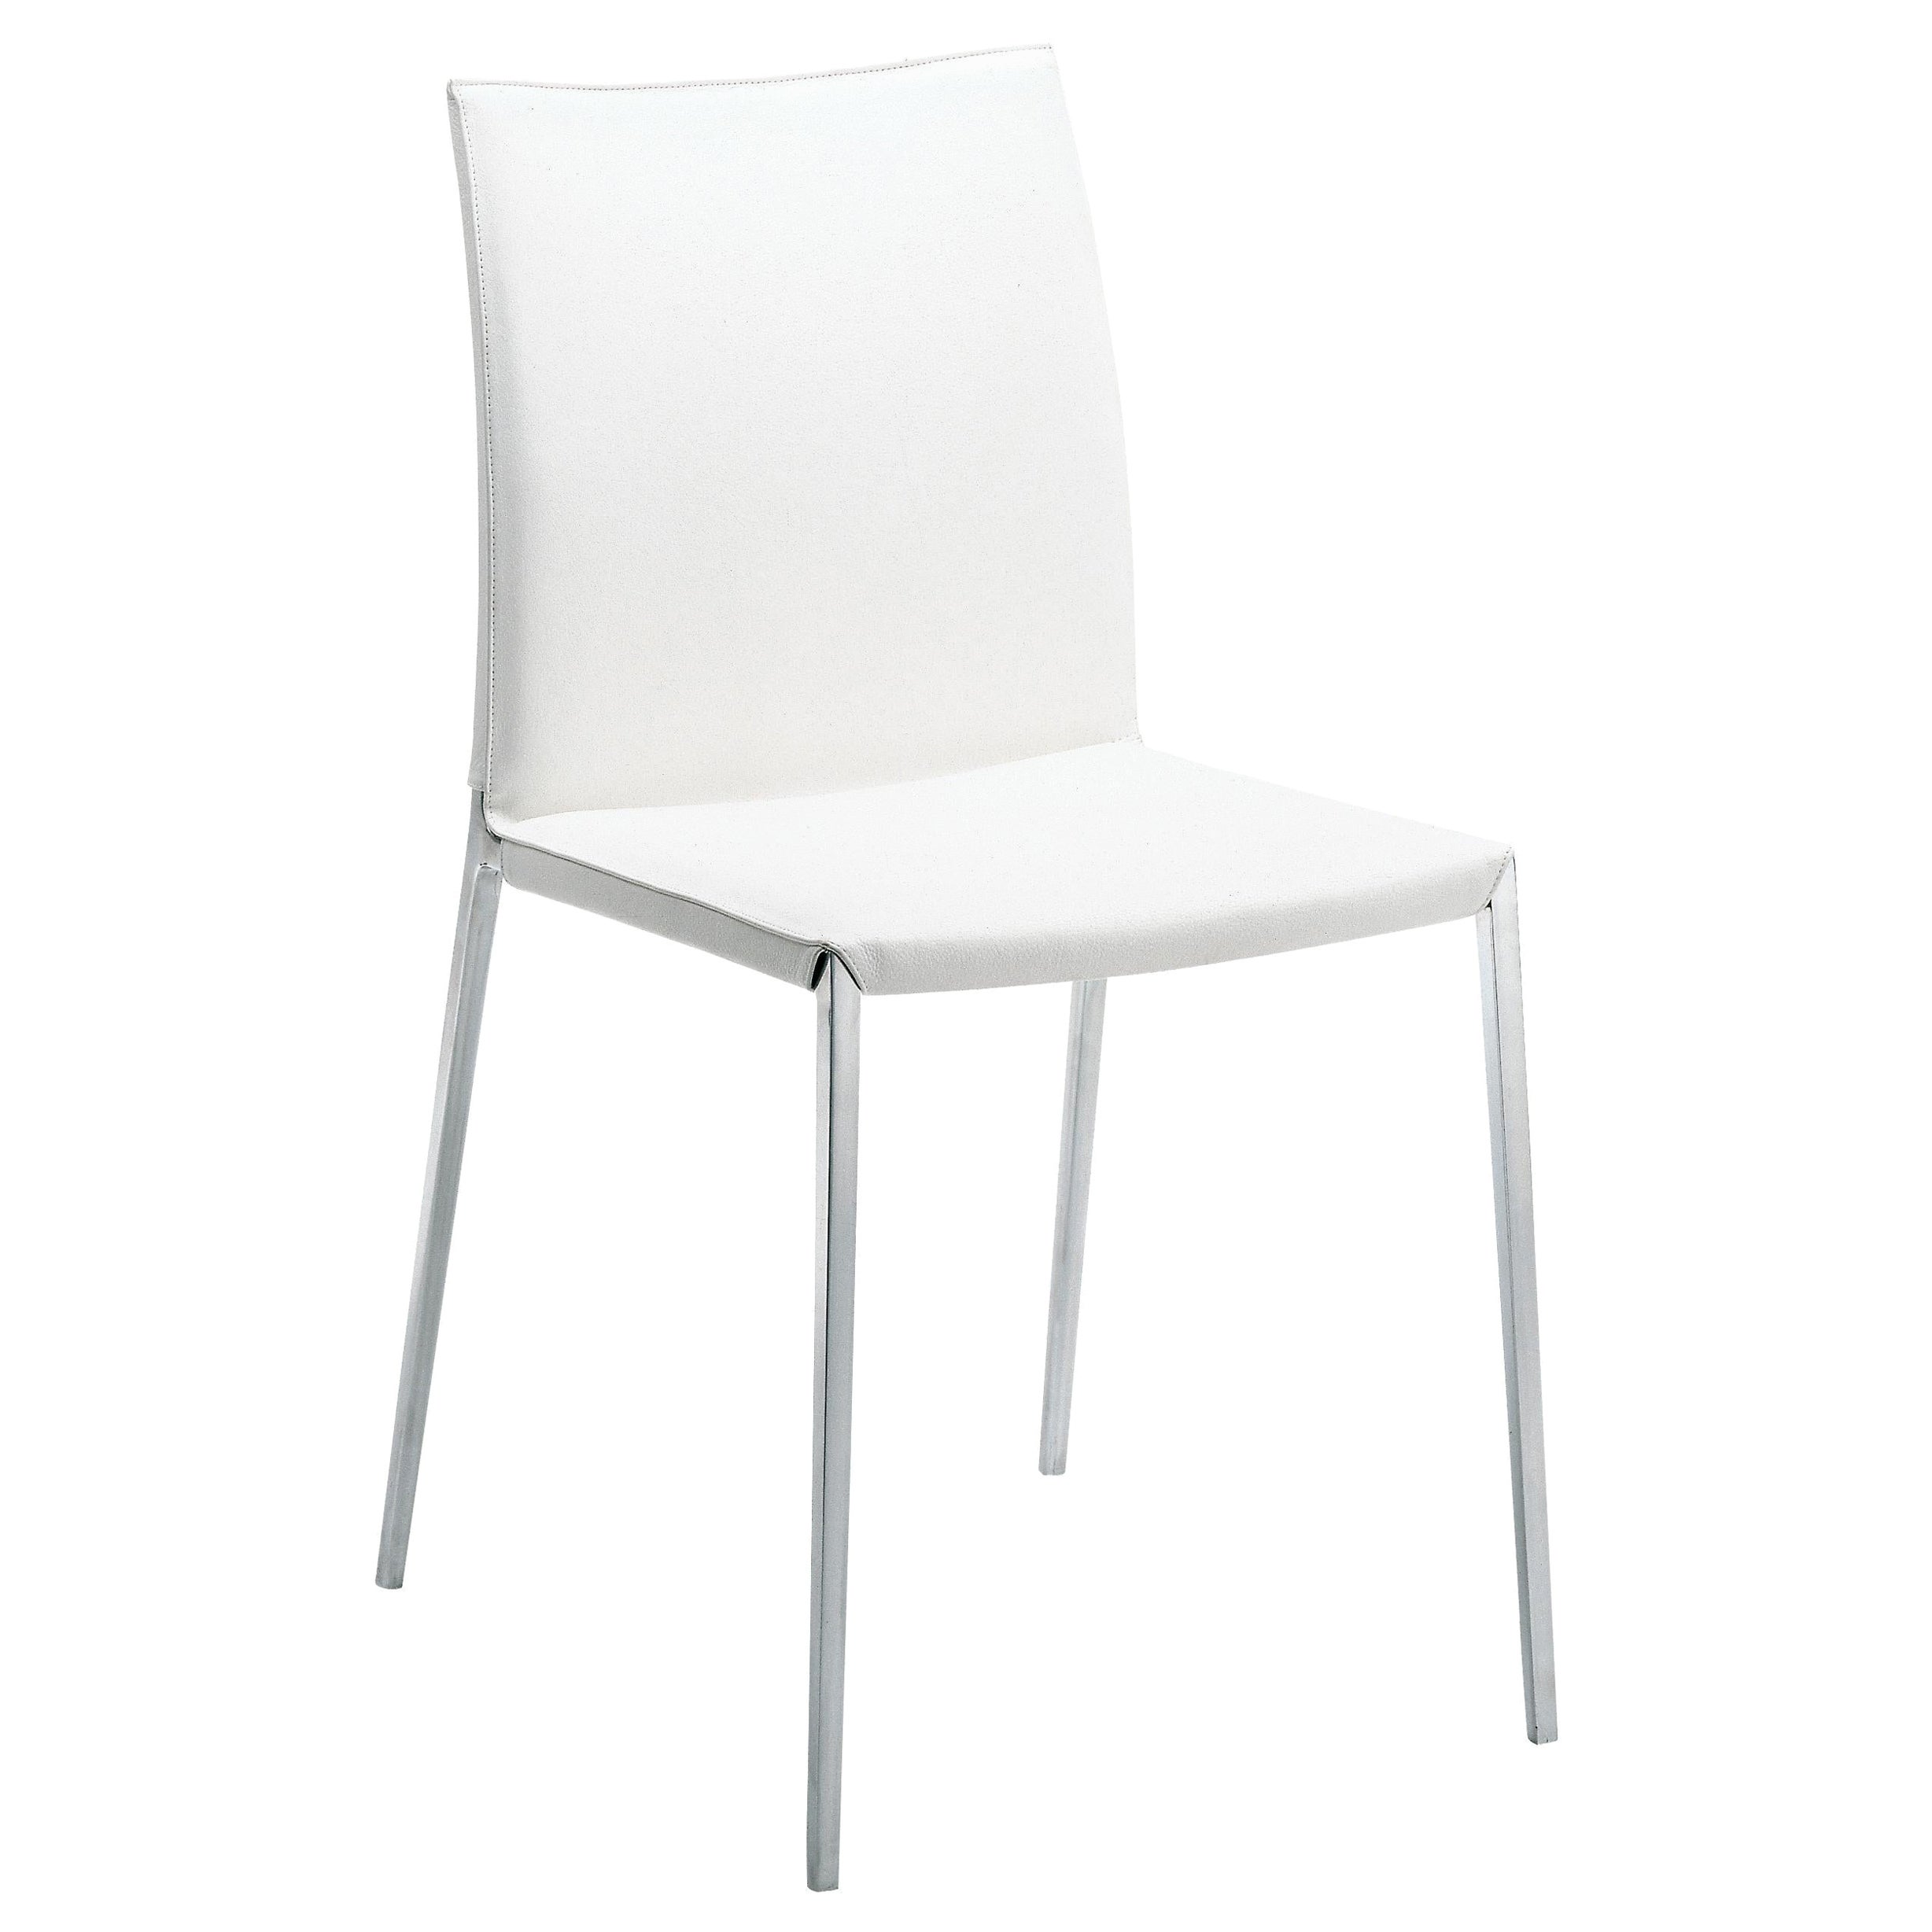 Zanotta Lia Chair in White Upholstery with Polished Aluminum Frame For Sale